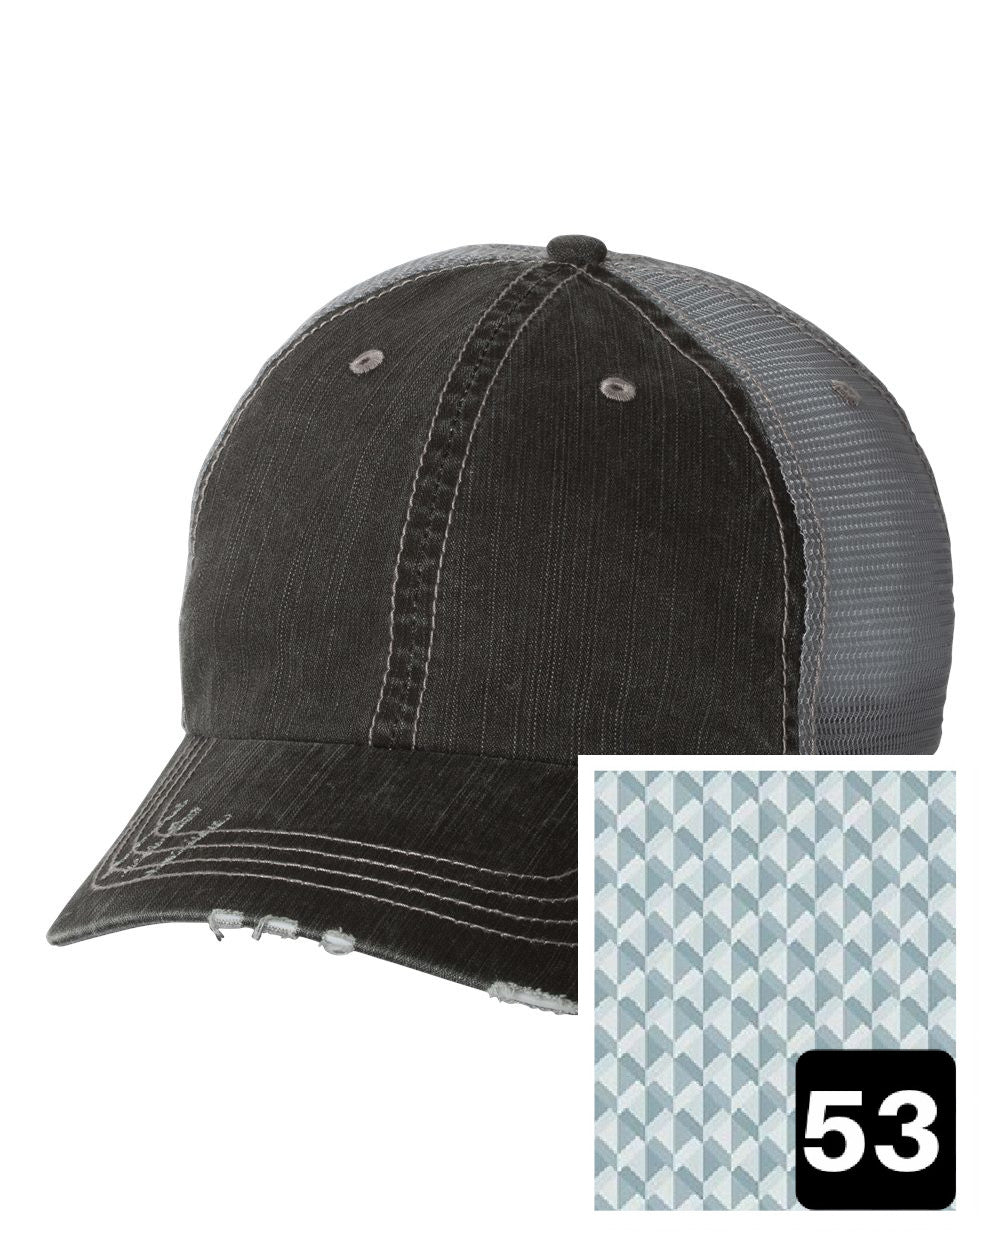 gray distressed trucker hat with multi-color stripe fabric state of California